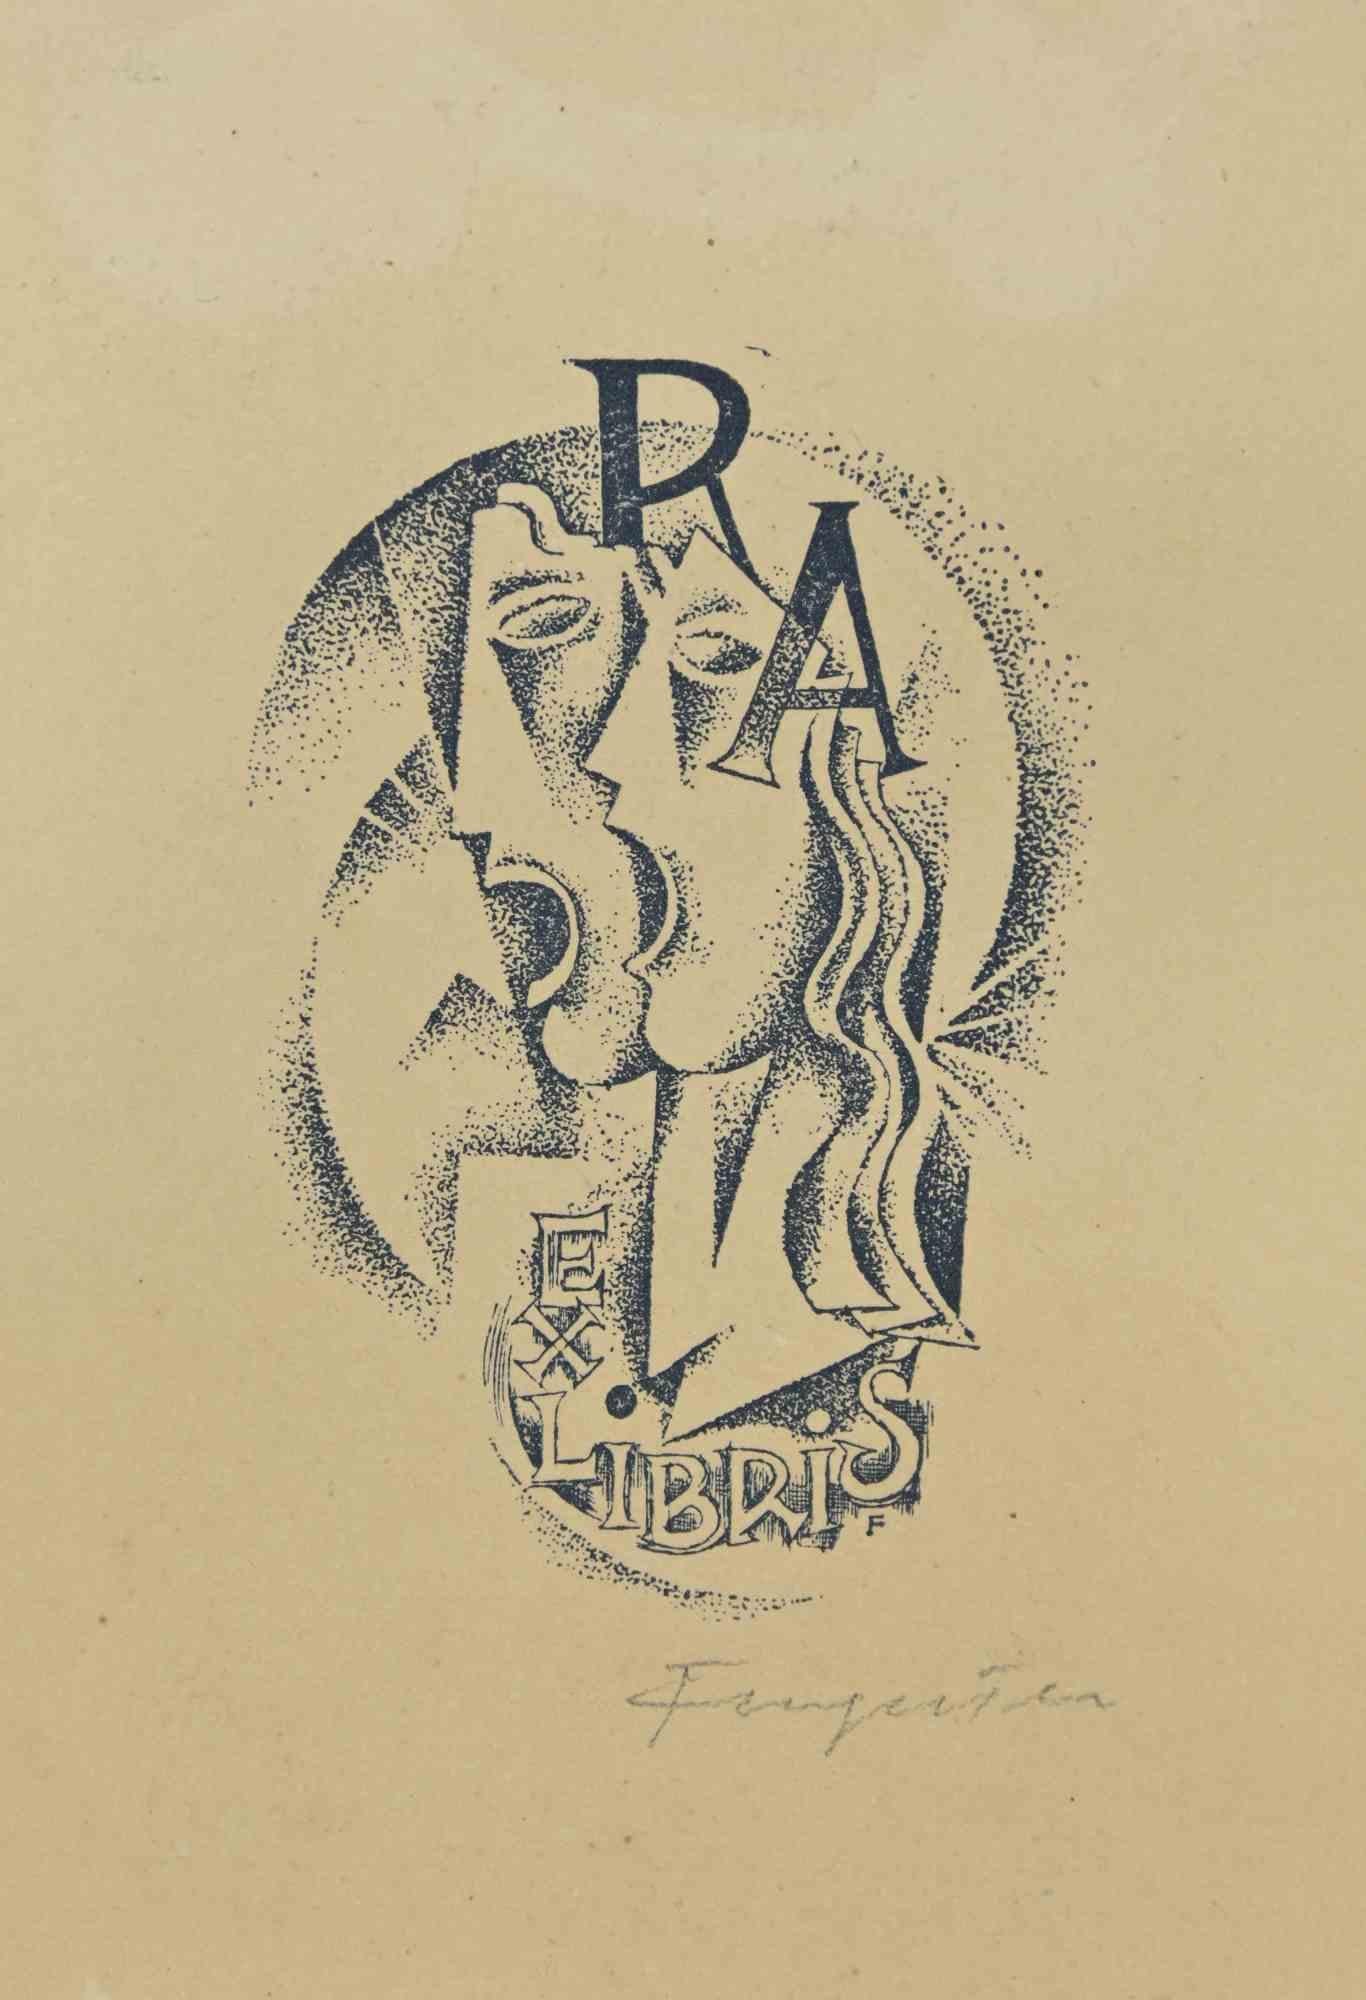 Ex Libris - R.A. is a Woodcut print created by Michel Fingesten.

Hand signed on the lower margin.

Good conditions.

Michel Fingesten (1884 - 1943) was a Czech painter and engraver of Jewish origin. He is considered one of the greatest Ex Libris